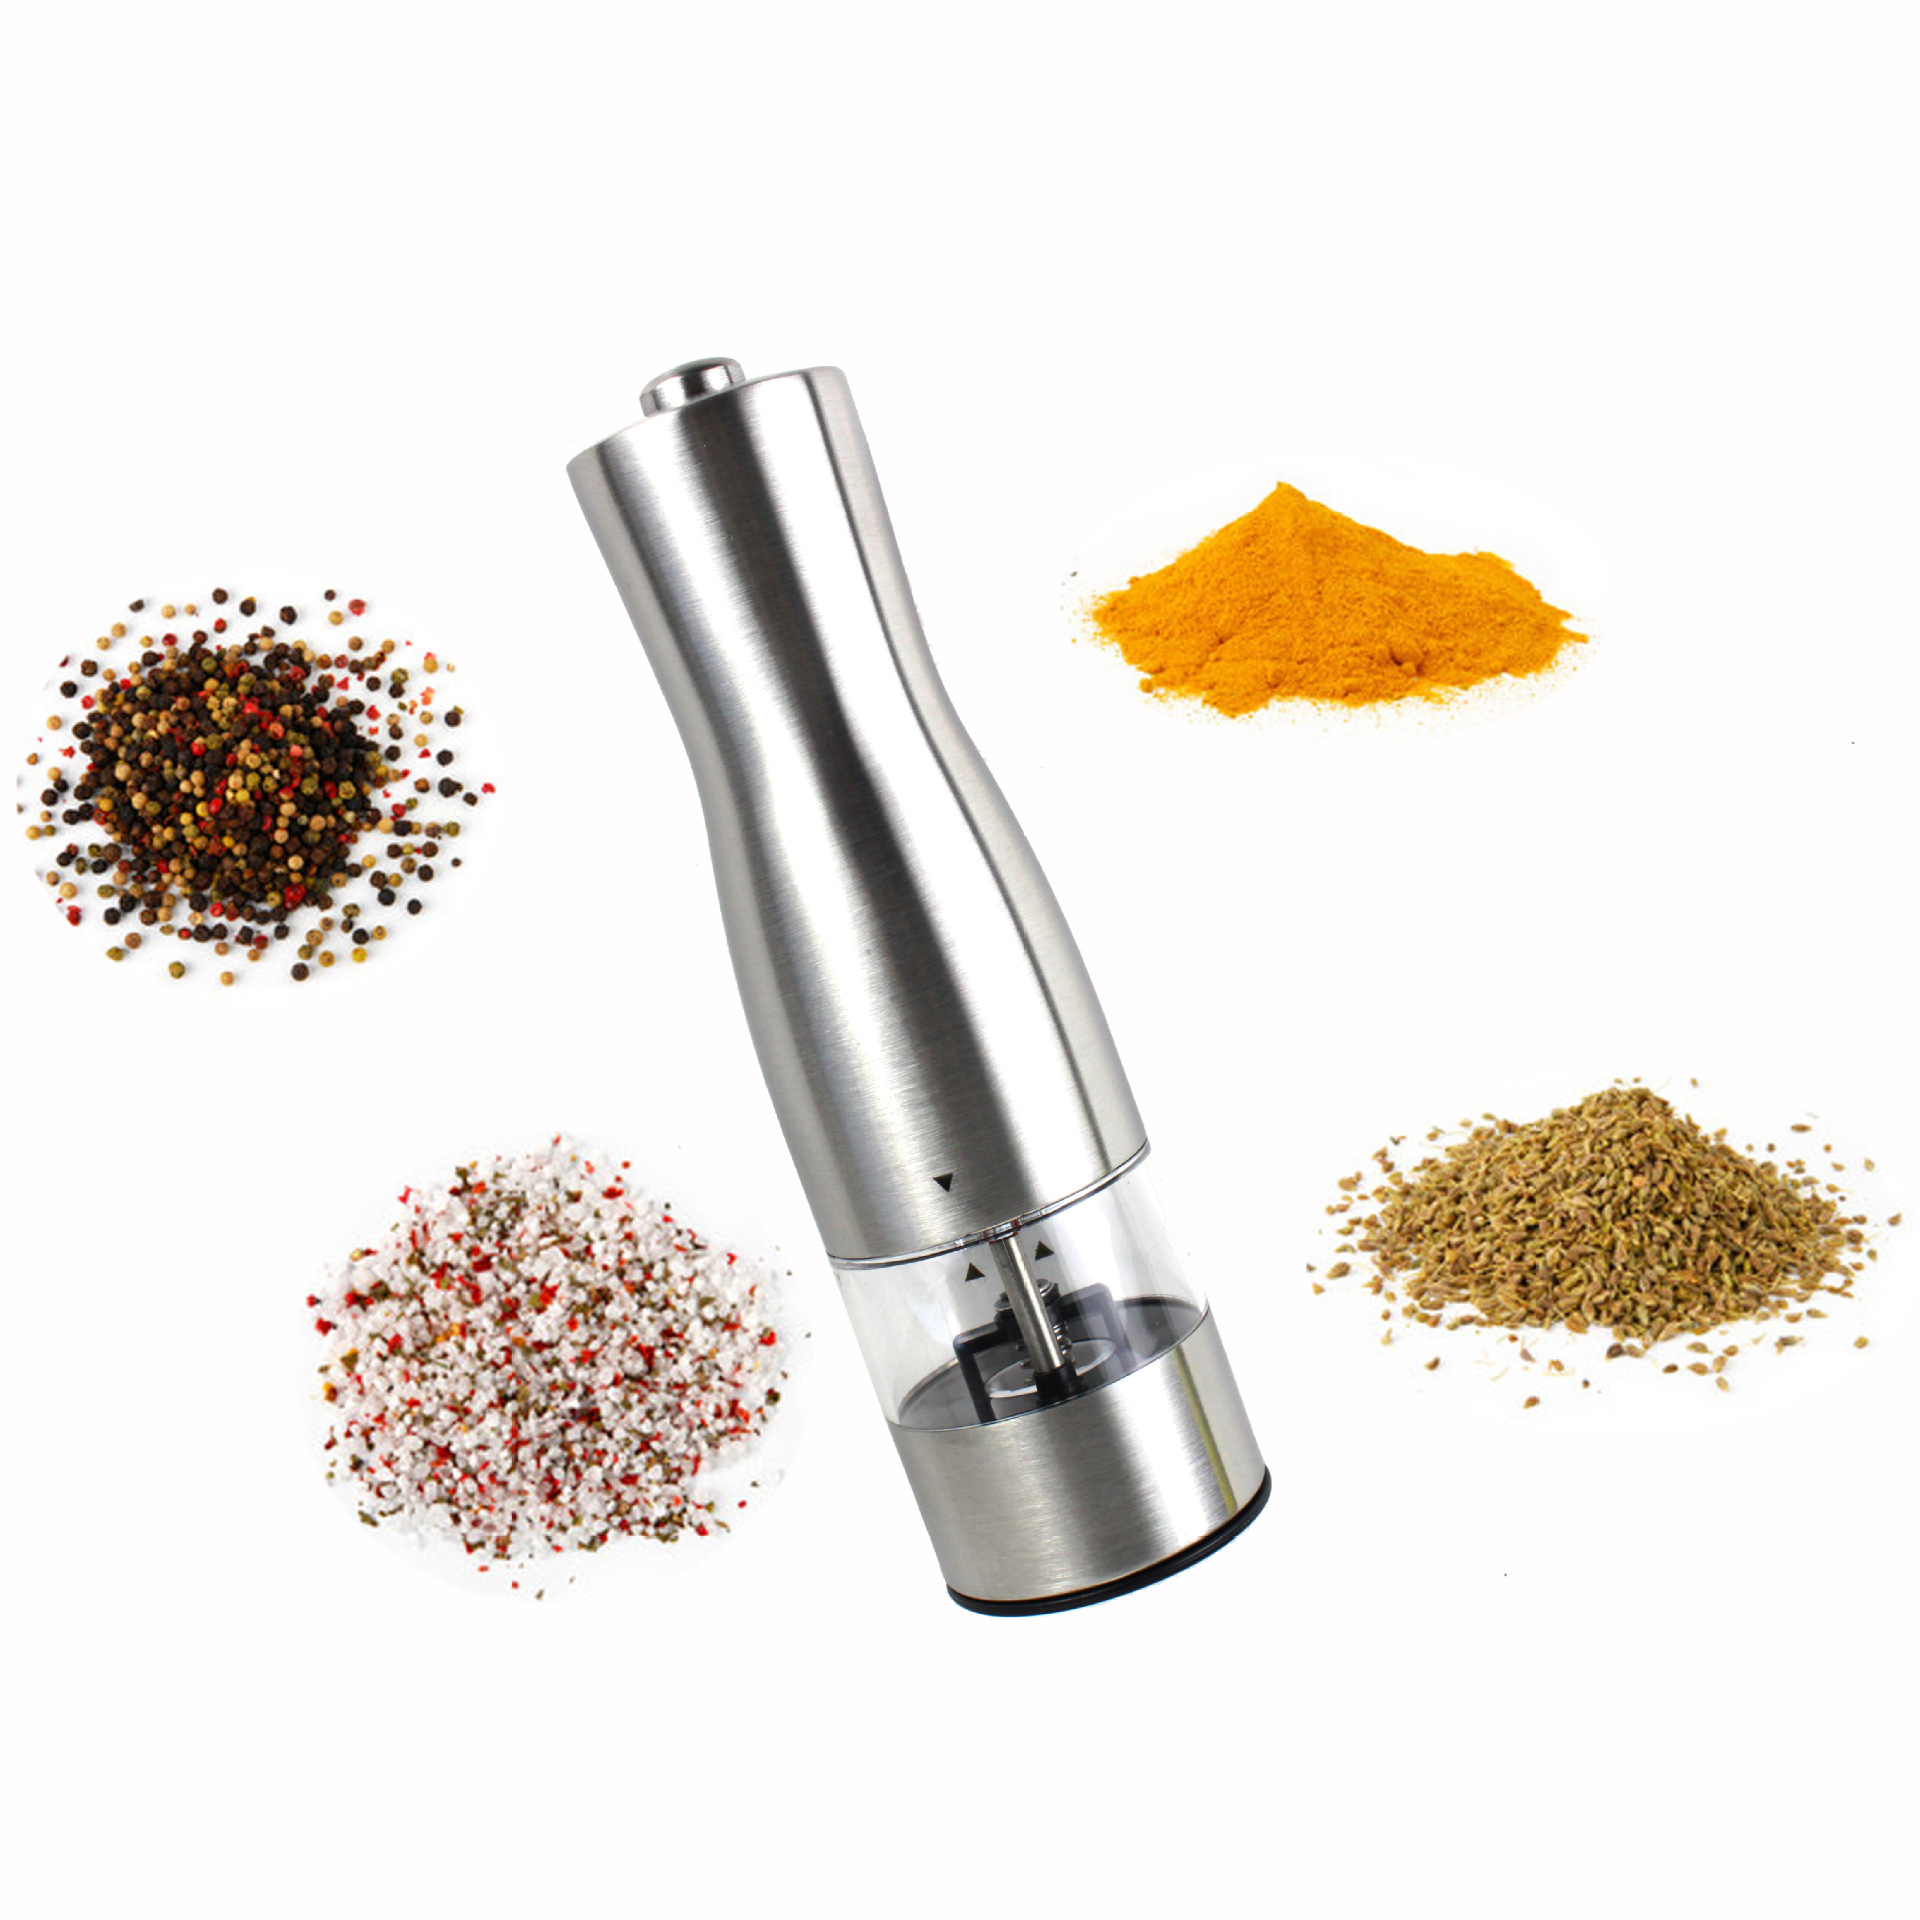 Factory Production Household Portable Stainless Steel Coffee Grinder Manual Grinding Machine Manual Pepper Grinding